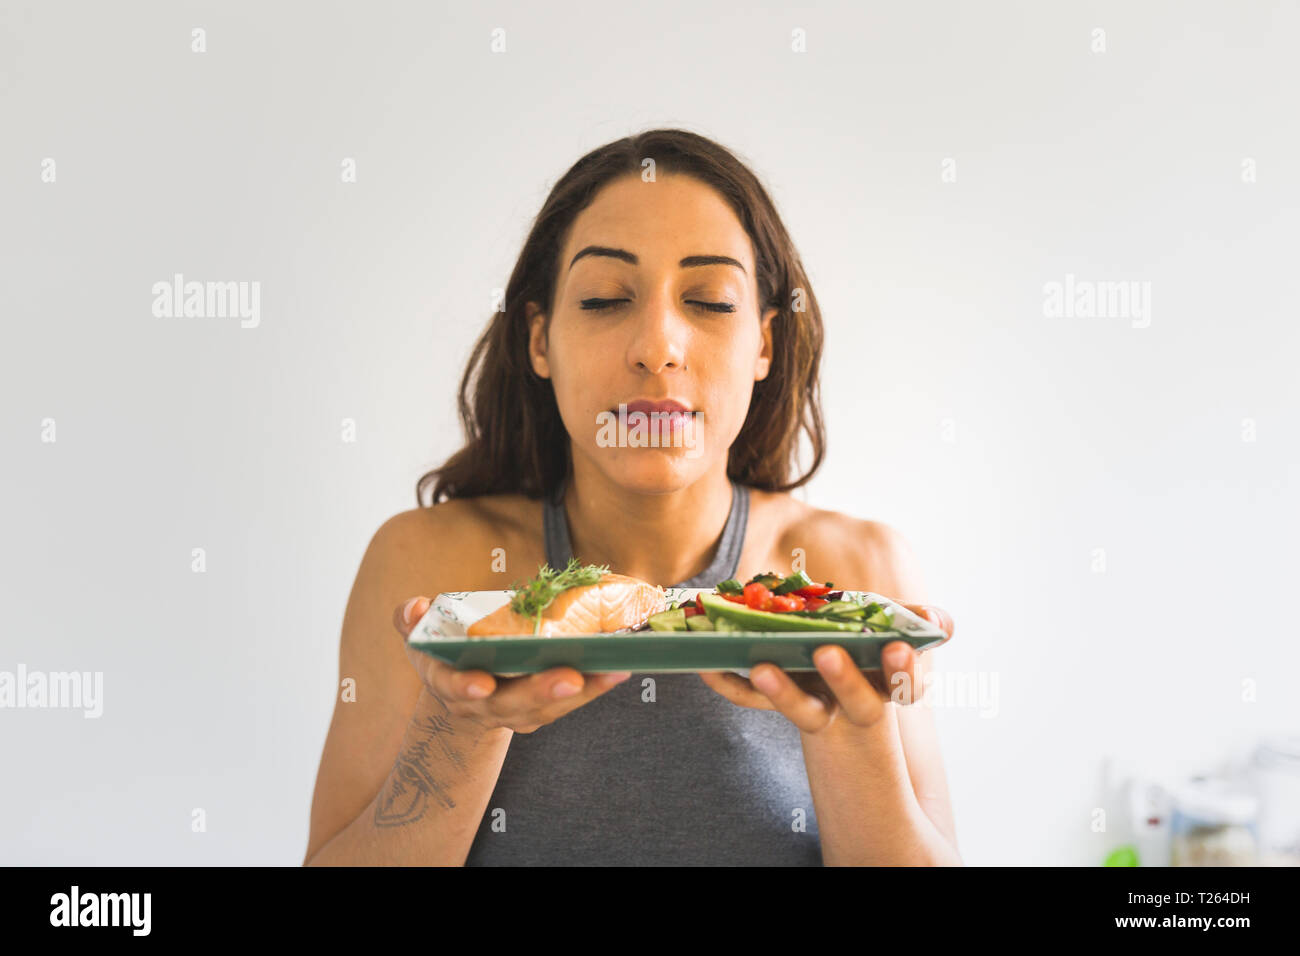 Woman holding plate with vegetables and salmon Stock Photo